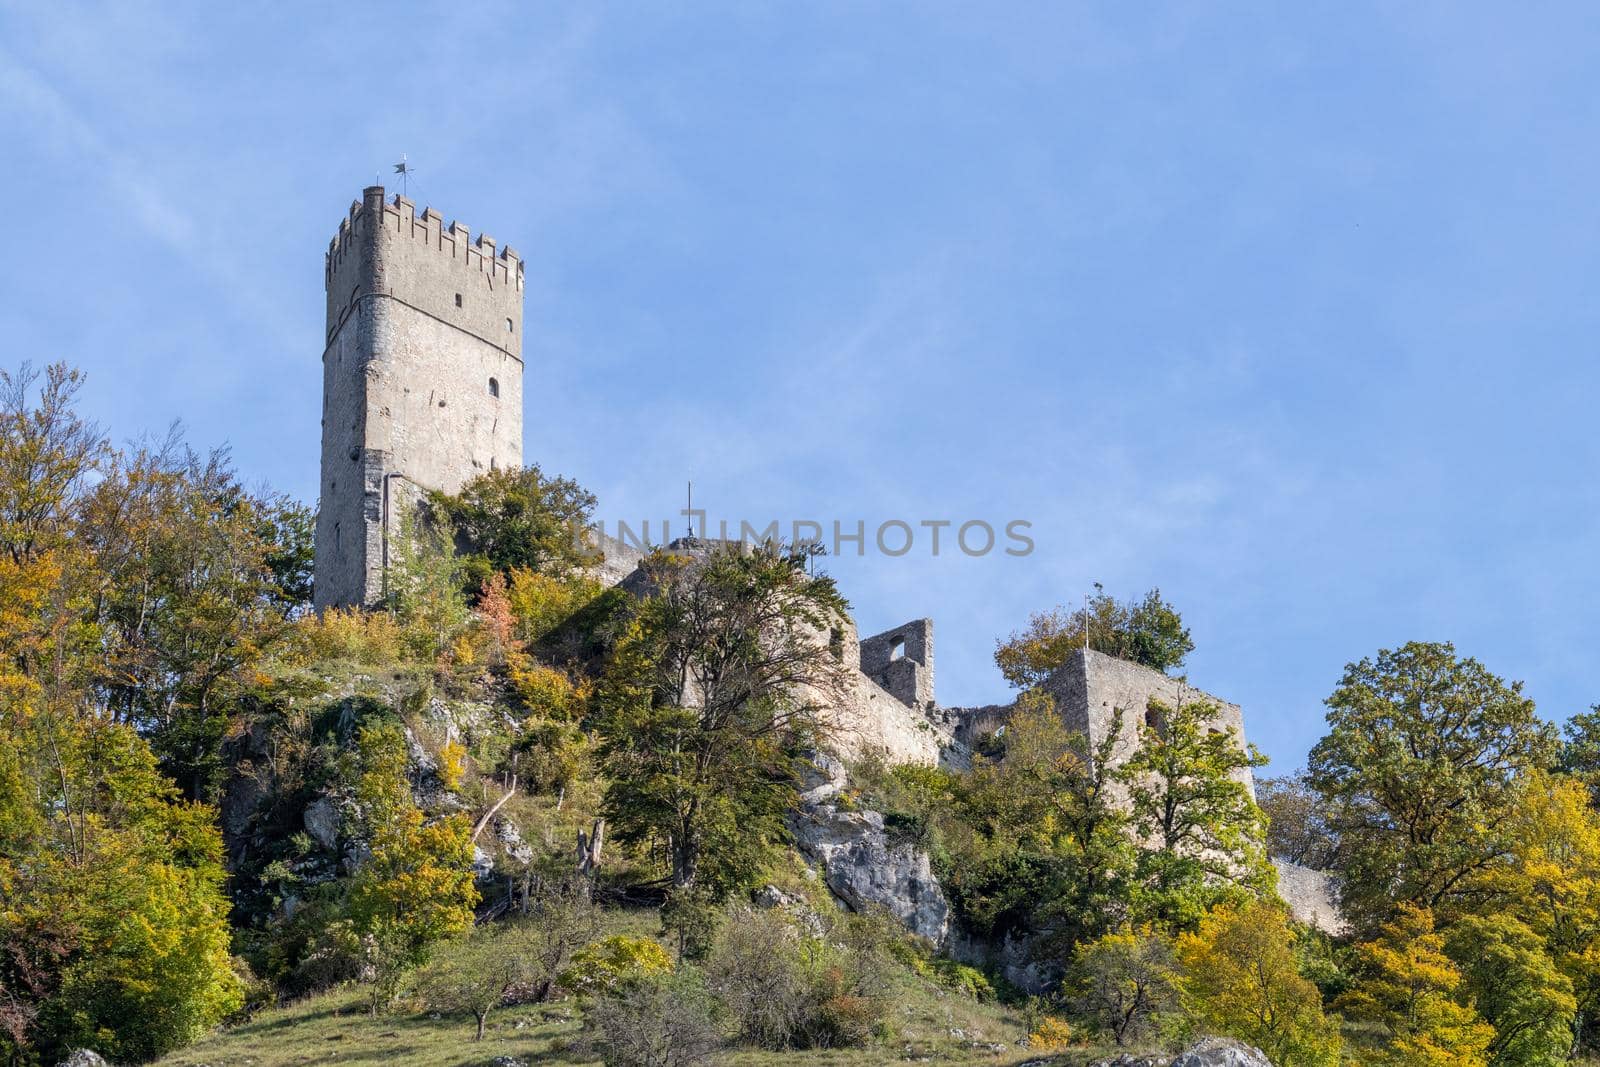 Idyllic view at Randeck castle in Markt Essing in Bavaria, Germany in autunm with multi colored trees